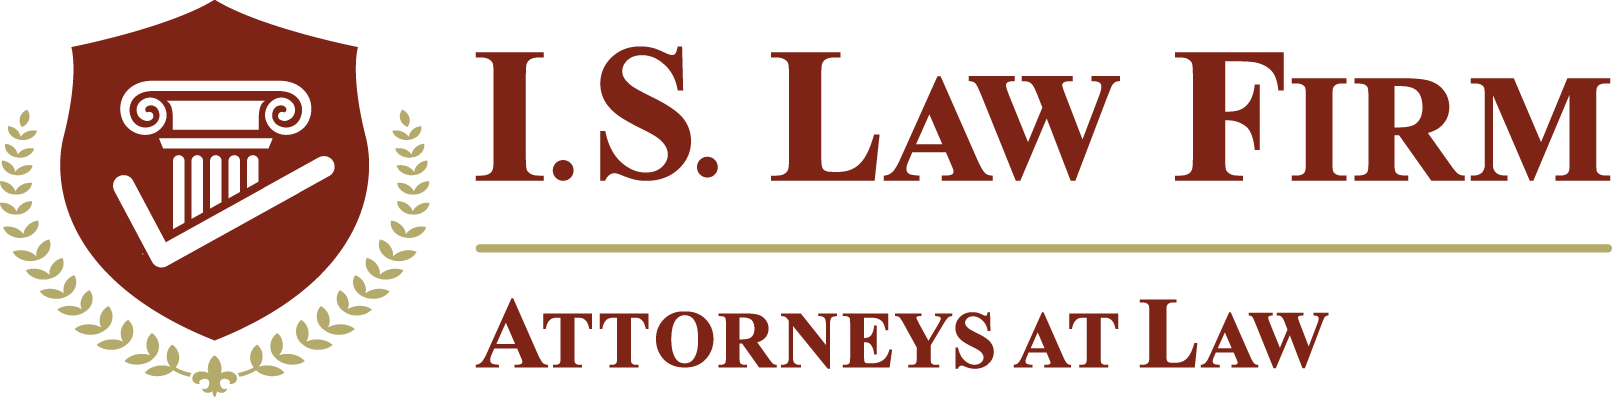 I.S. Law Firm